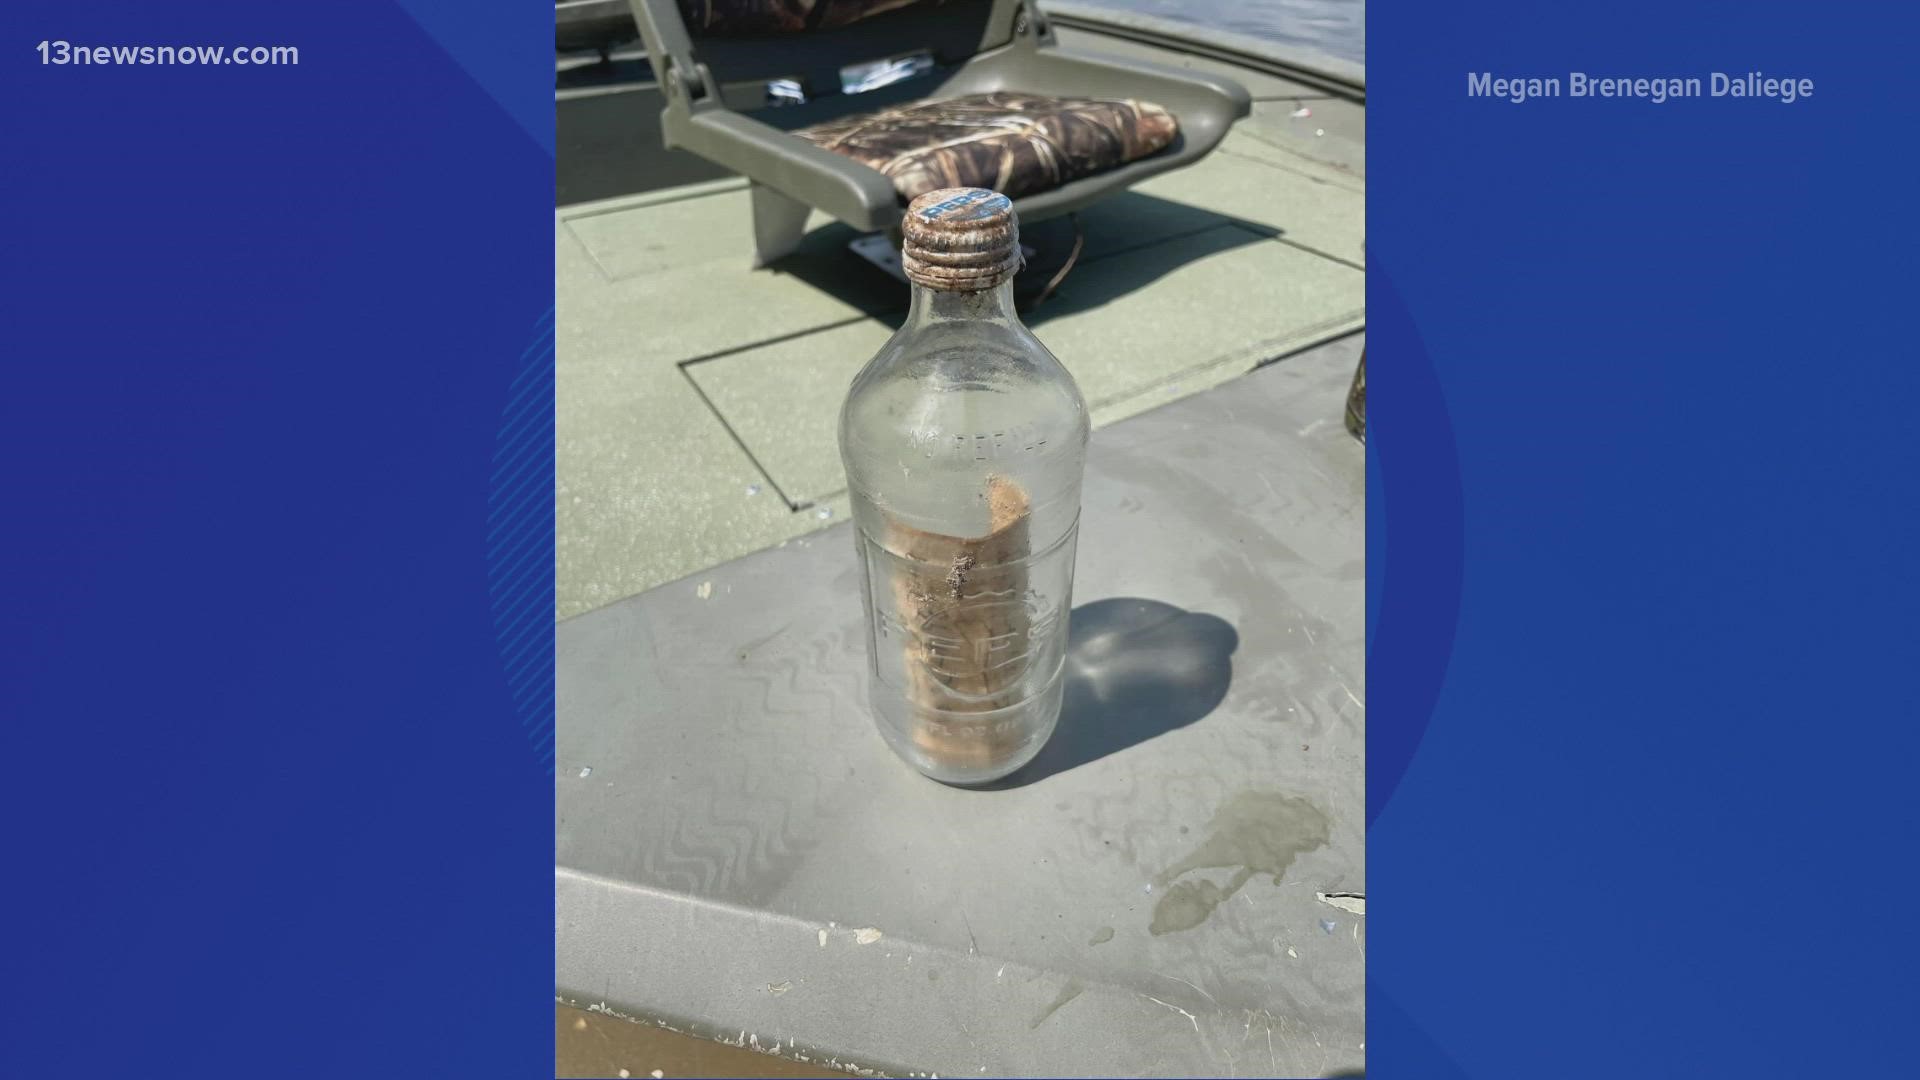 The mystery started when Brian Daliege and his son were walking along the York River. They spotted an antique Pepsi bottle resting on a ledge above the water.